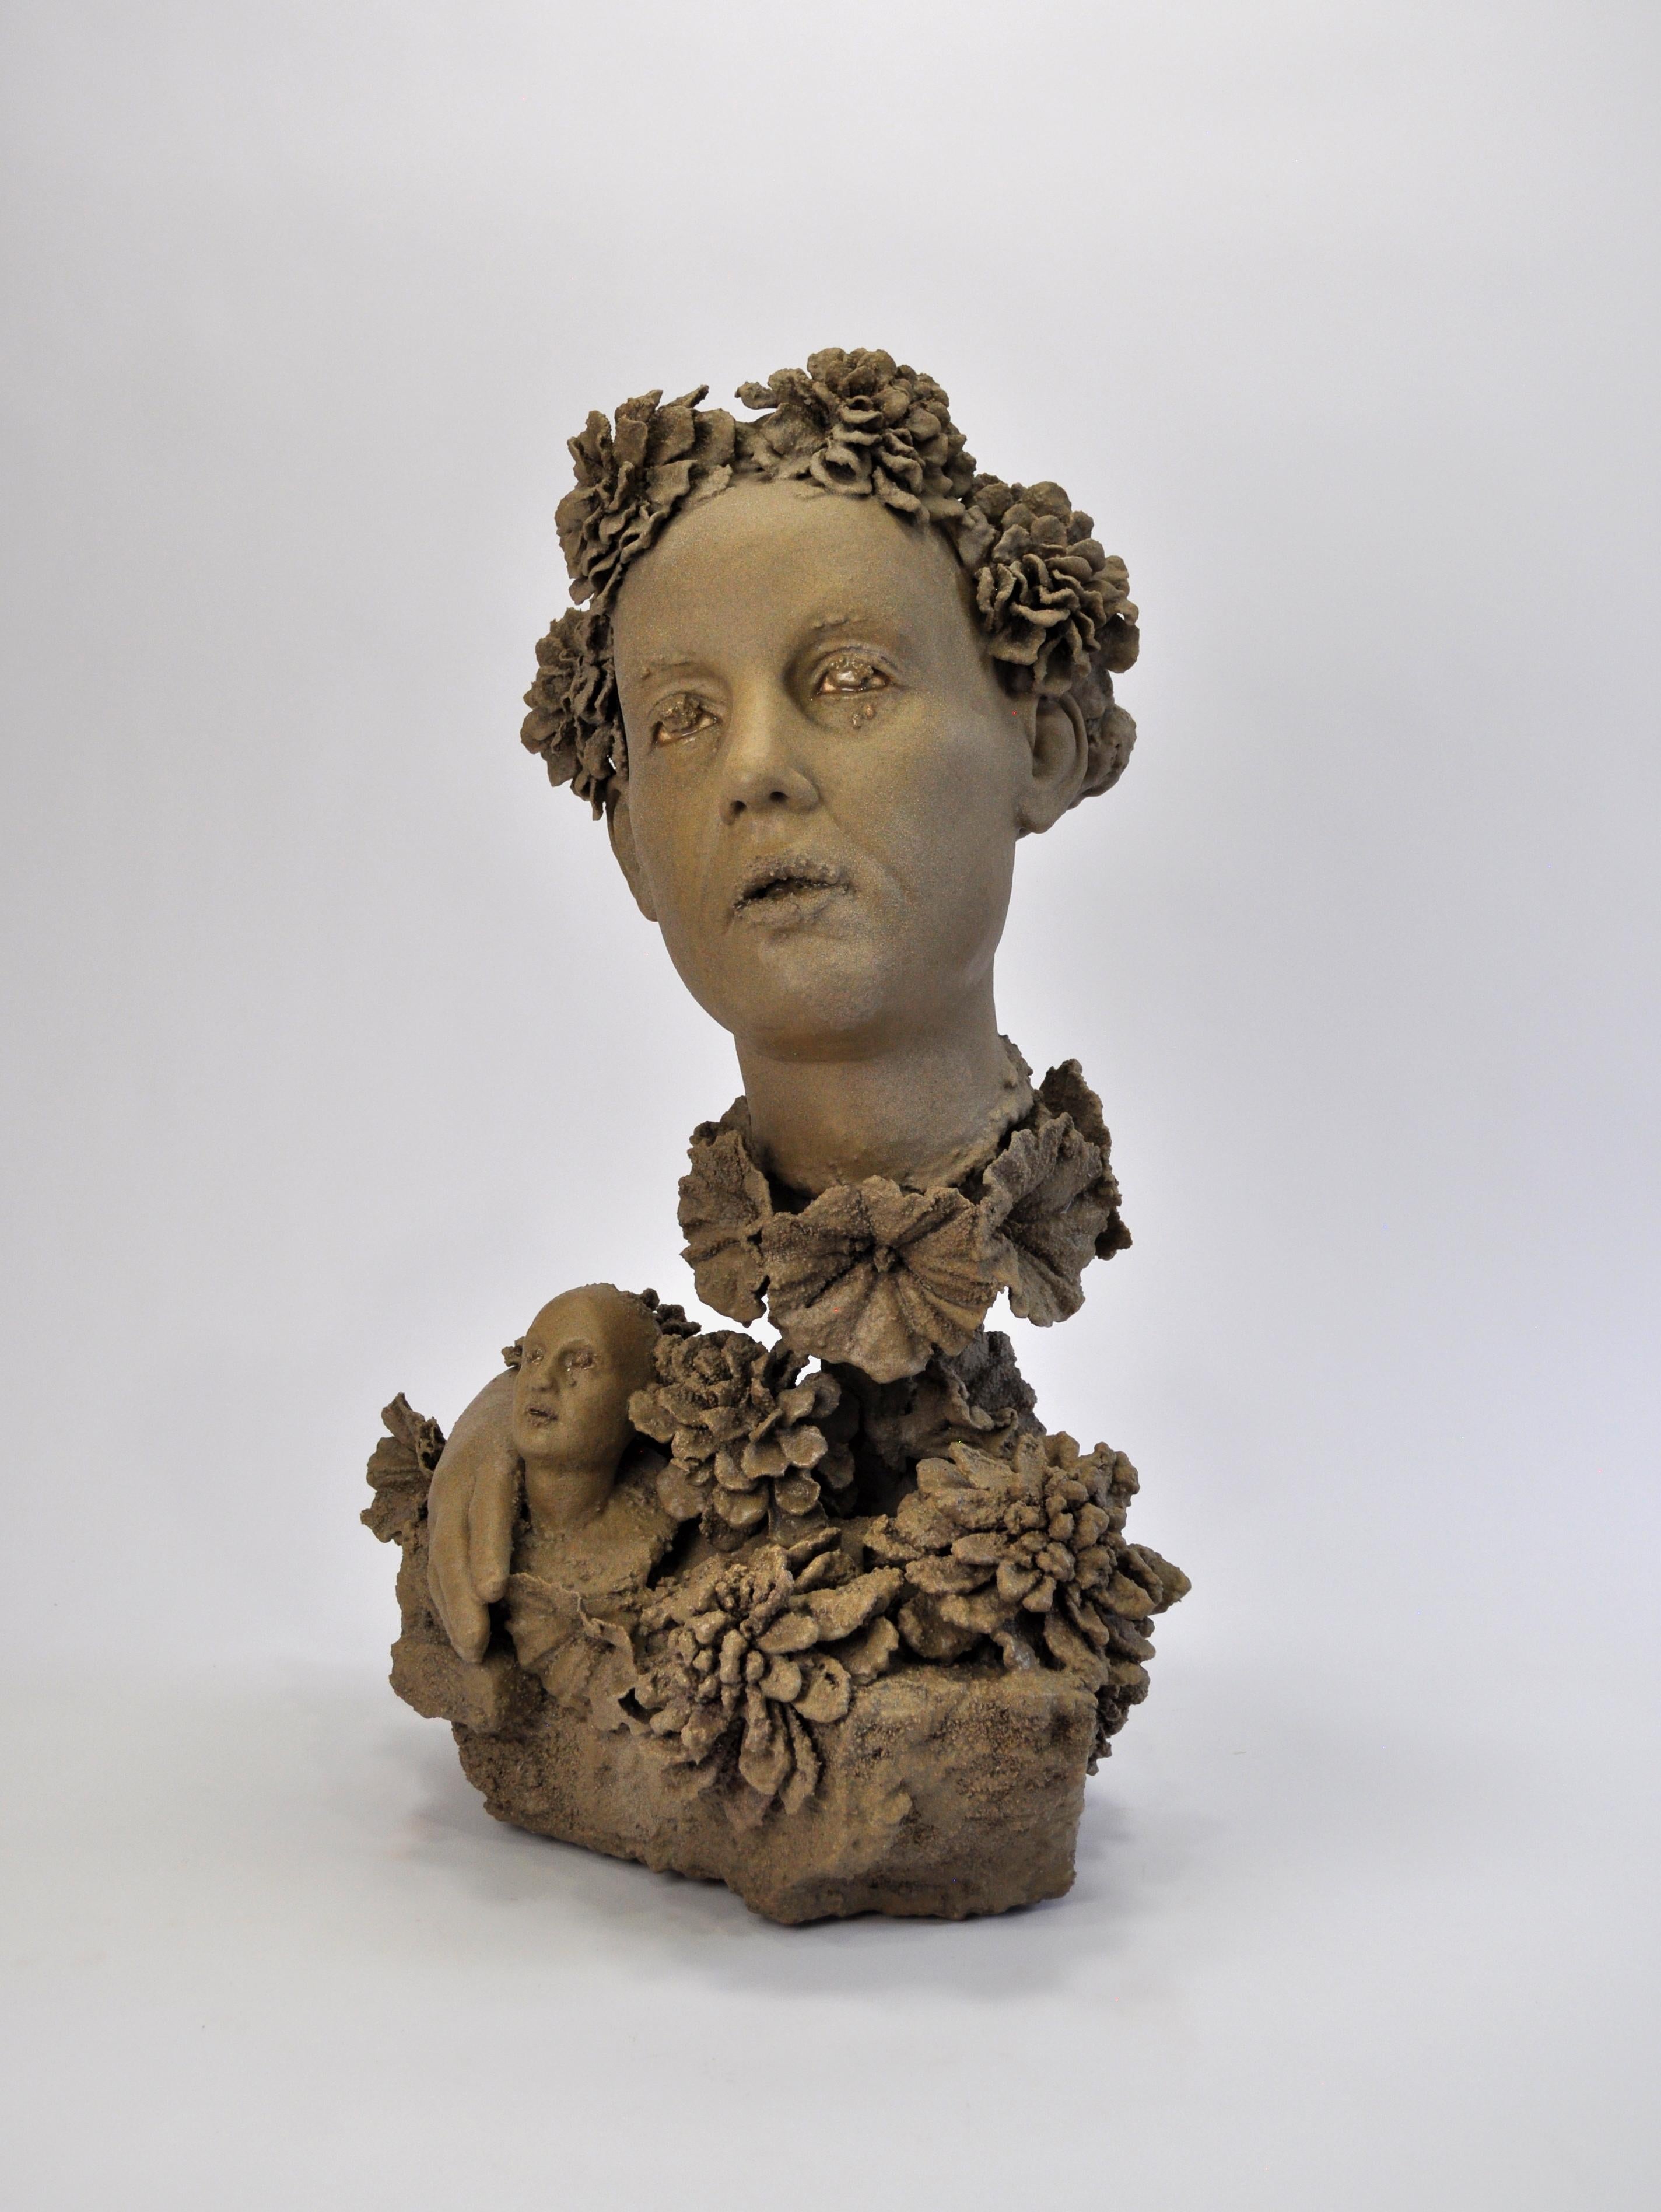 Christine Golden Figurative Sculpture - BLOOMING BUST- surreal ceramic sculpture of woman with flowers